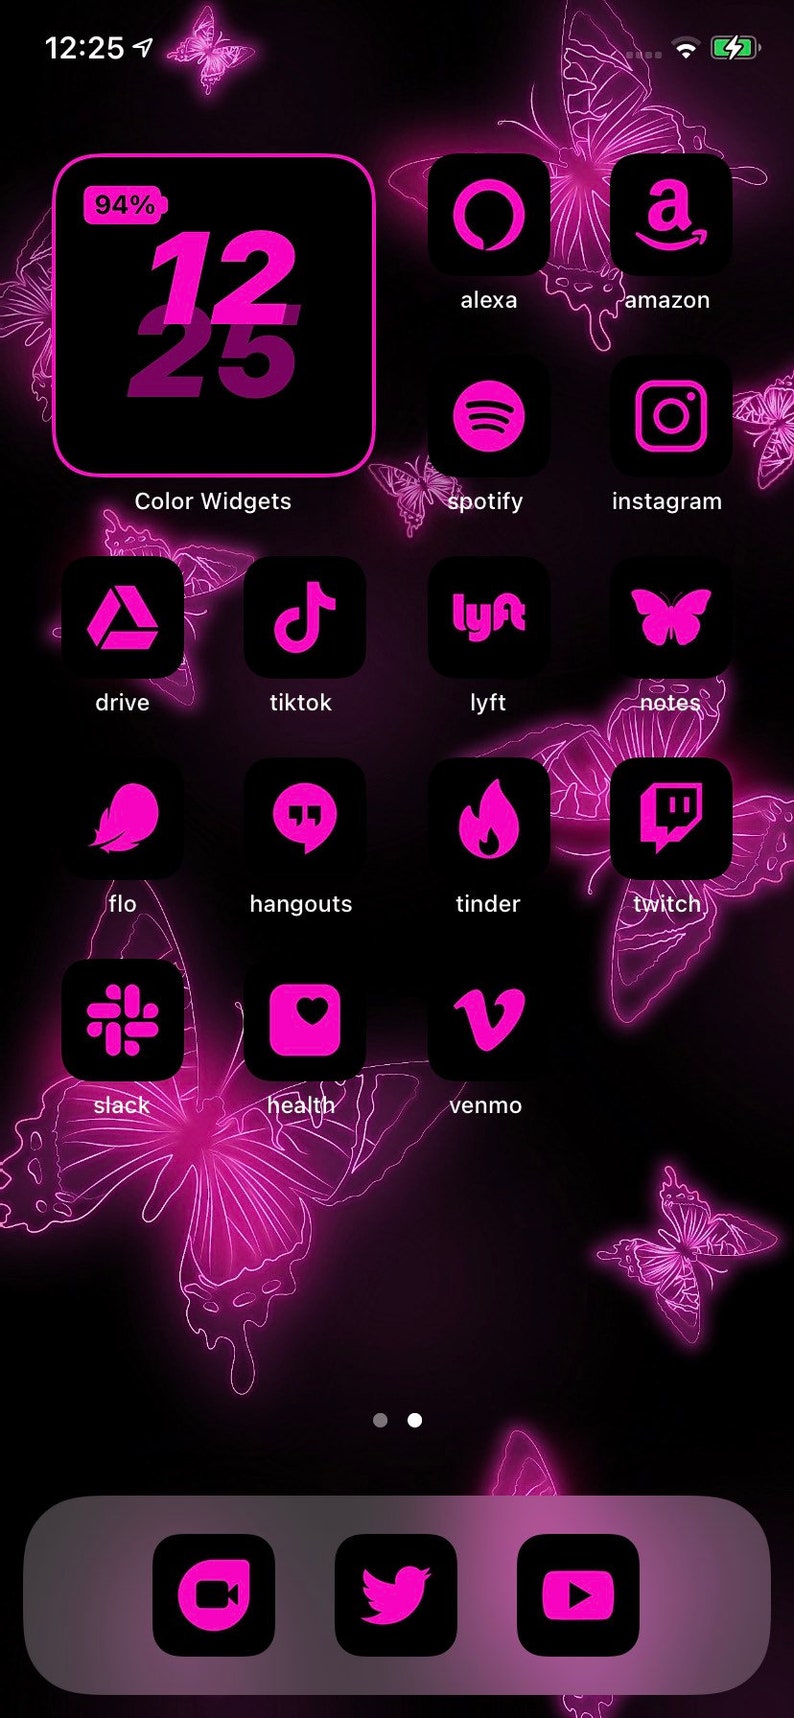 App Icons Neon Pink Black Pink, Aesthetic Home Screen Colorful App Icons, Widgets Neon, iPhone, Android image 2